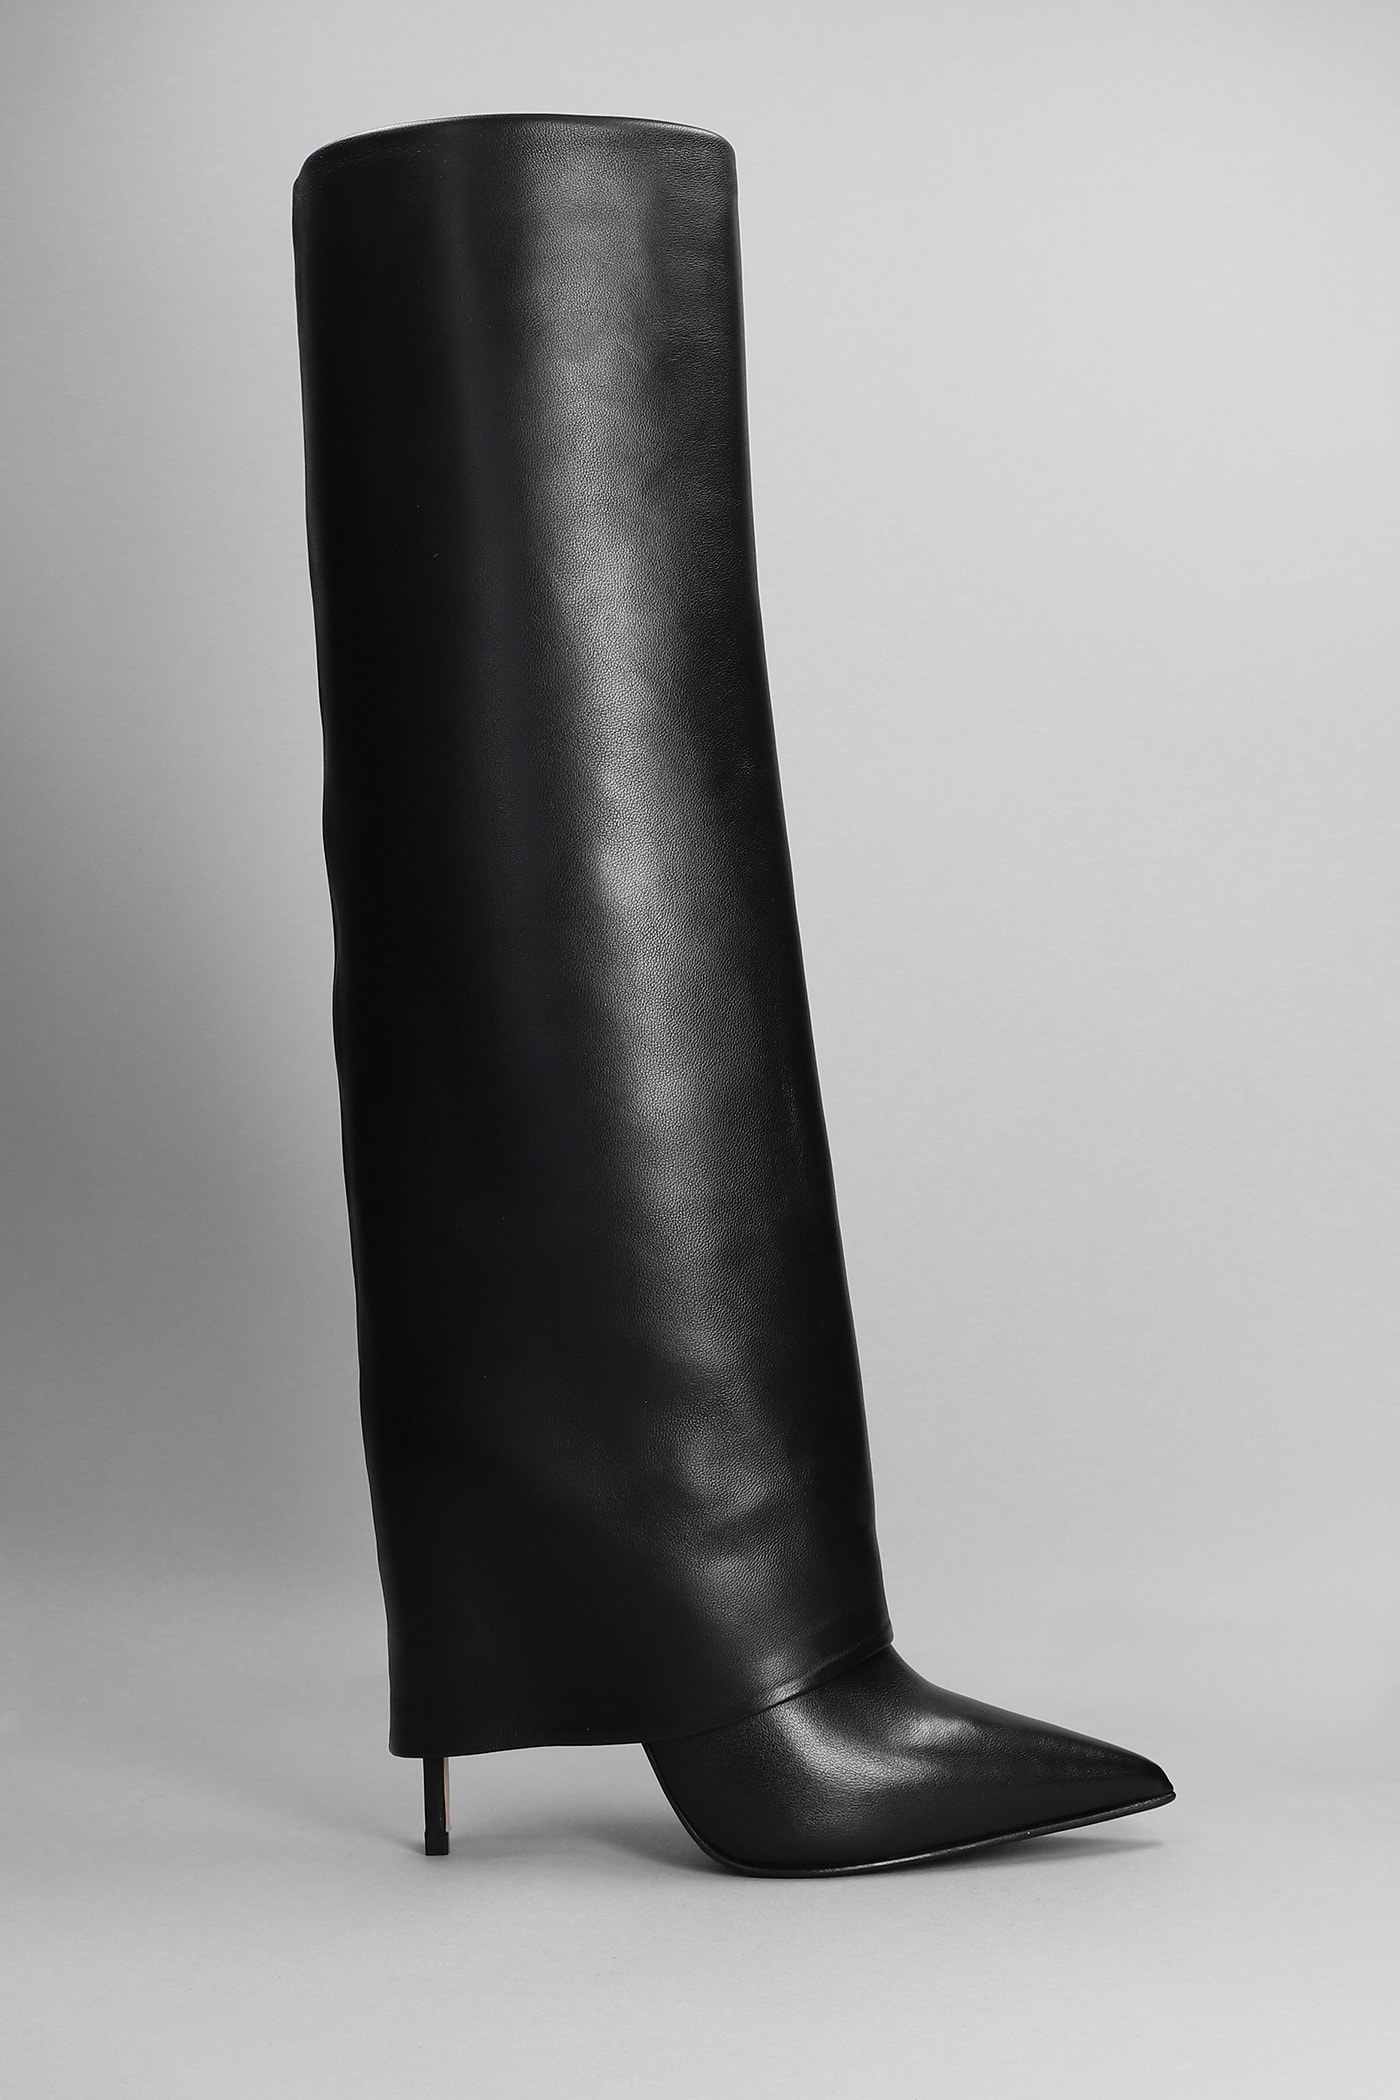 LE SILLA ANDY 120 HIGH HEELS BOOTS IN BLACK LEATHER